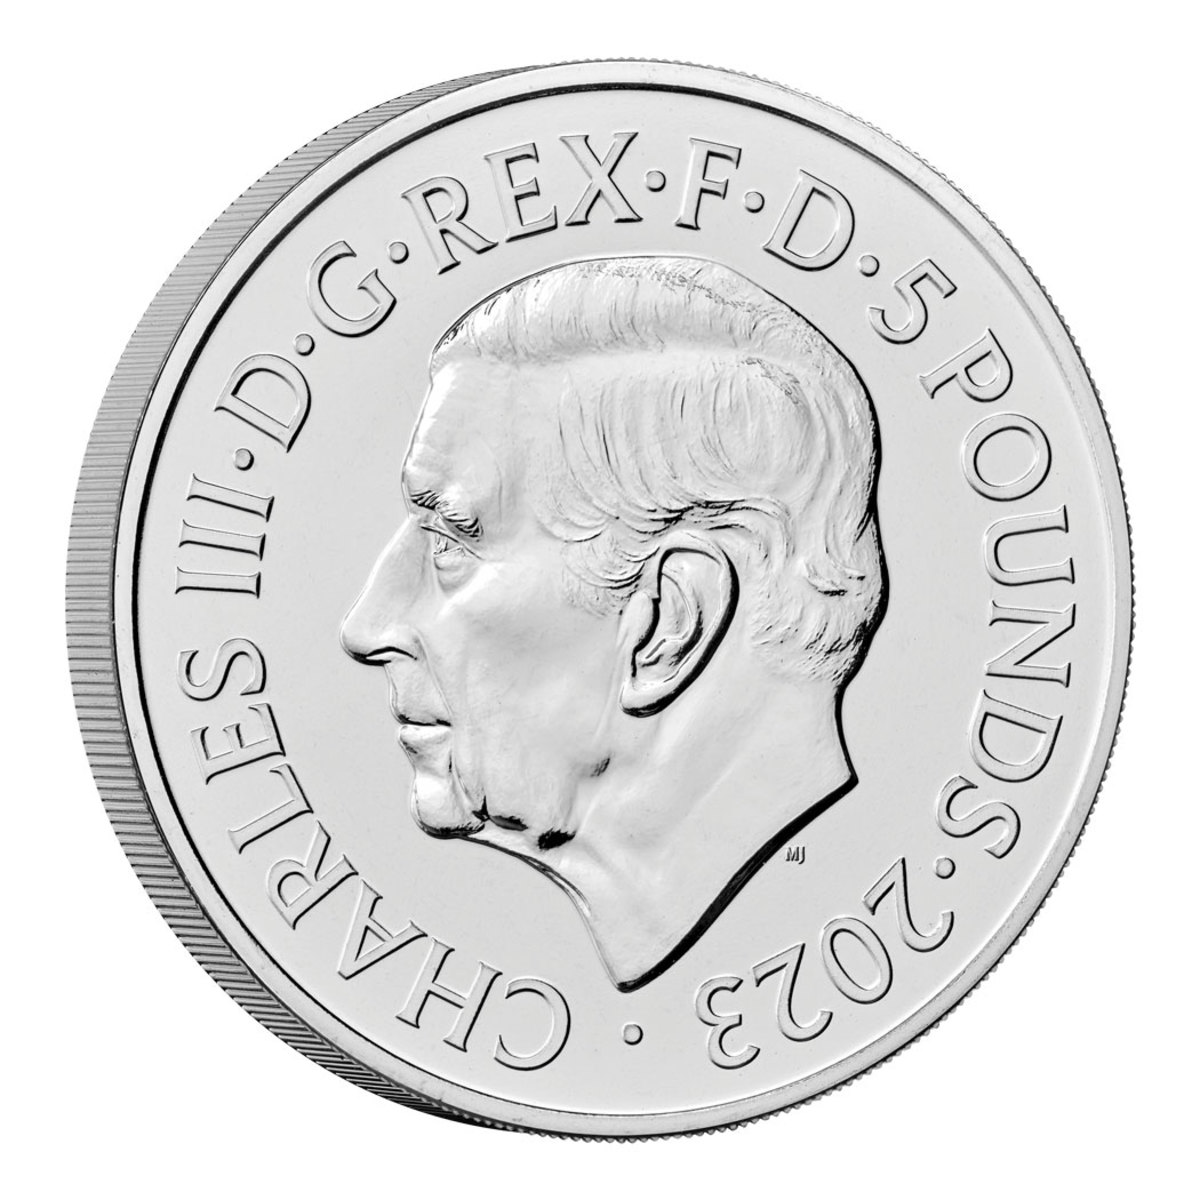 The Royal Mint Reveals the First Coins of 2023 Bearing the King’s